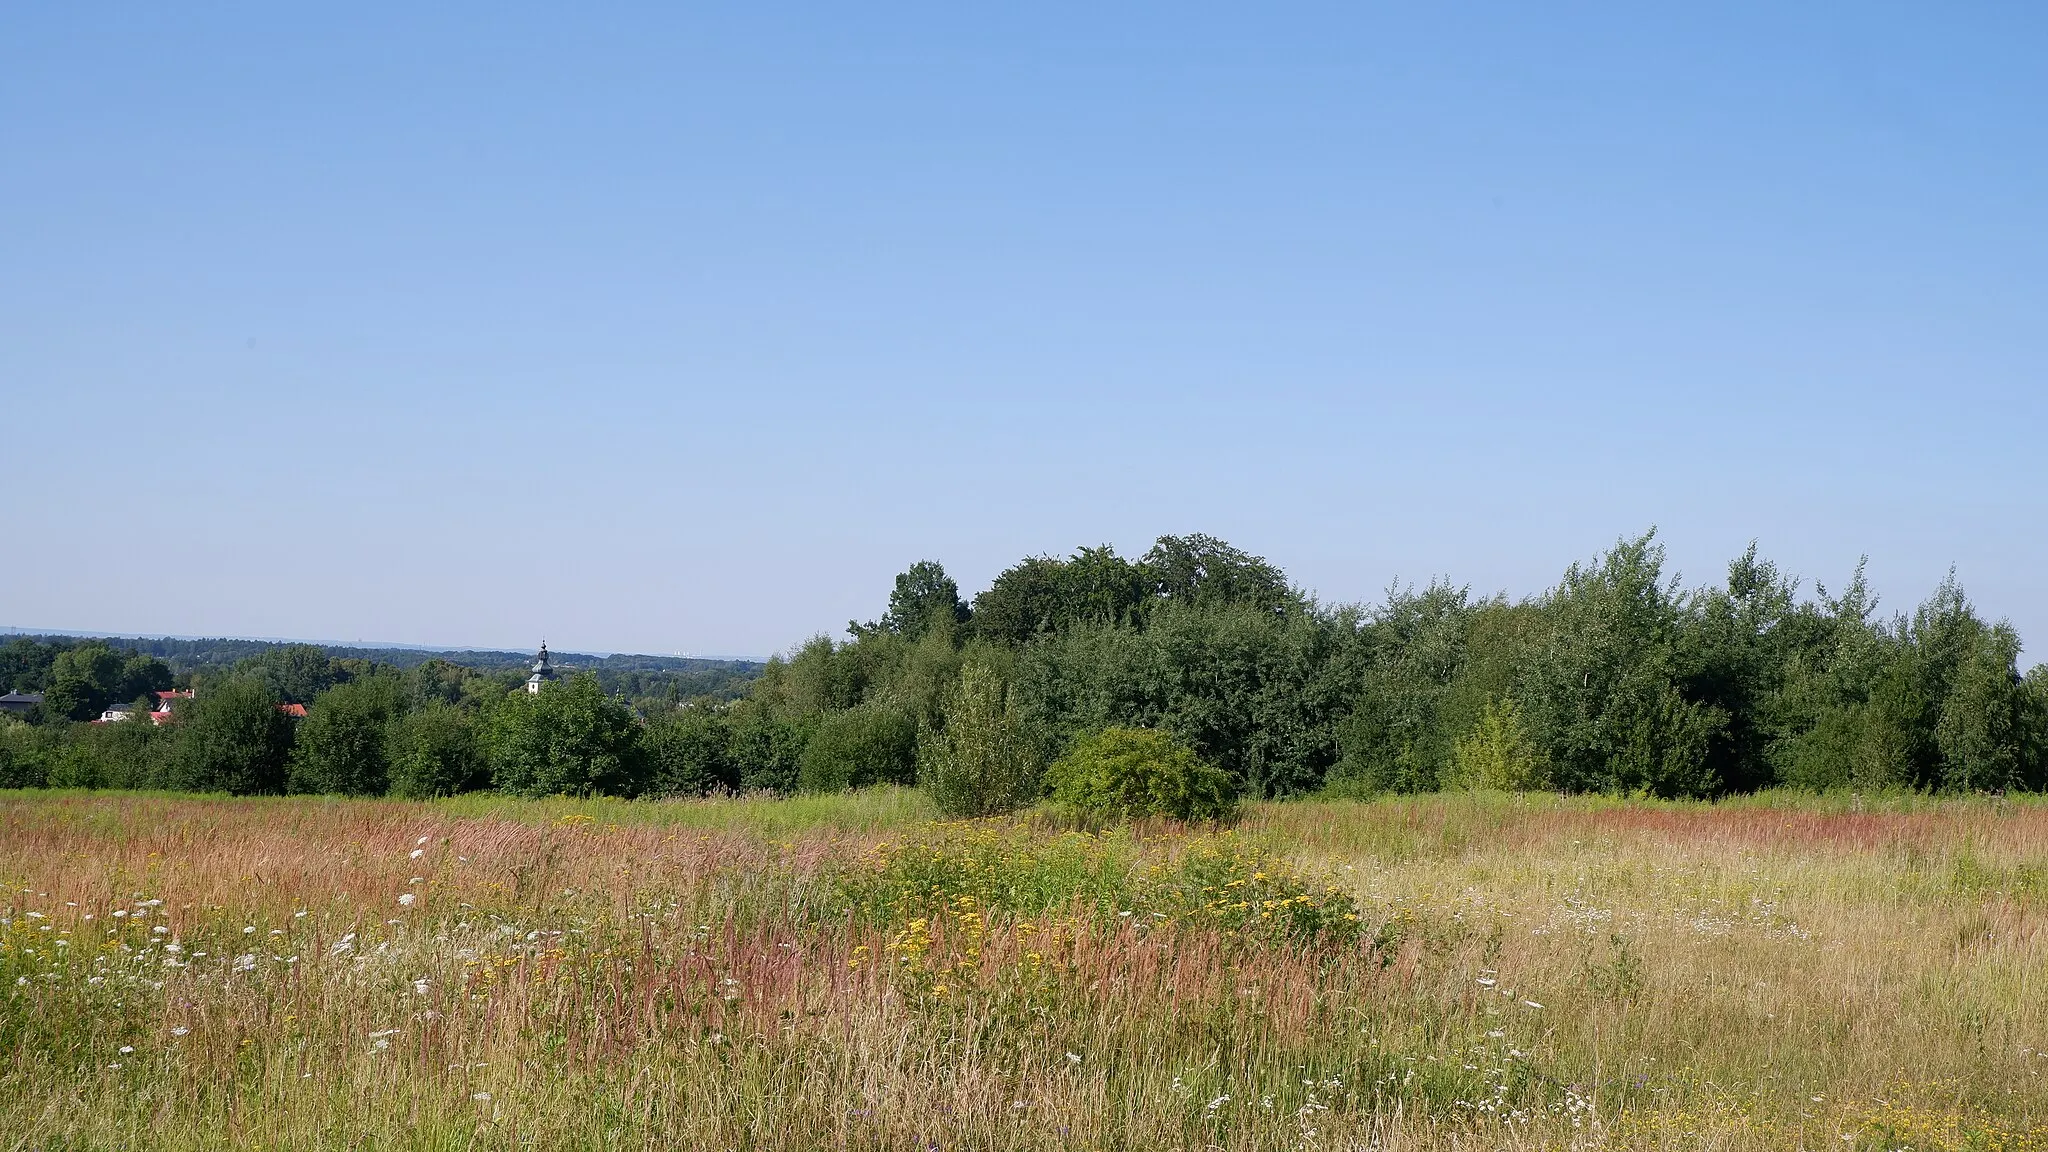 Photo showing: View of the remains of the Księży Las forest in Hałcnów, a district of Bielsko-Biała